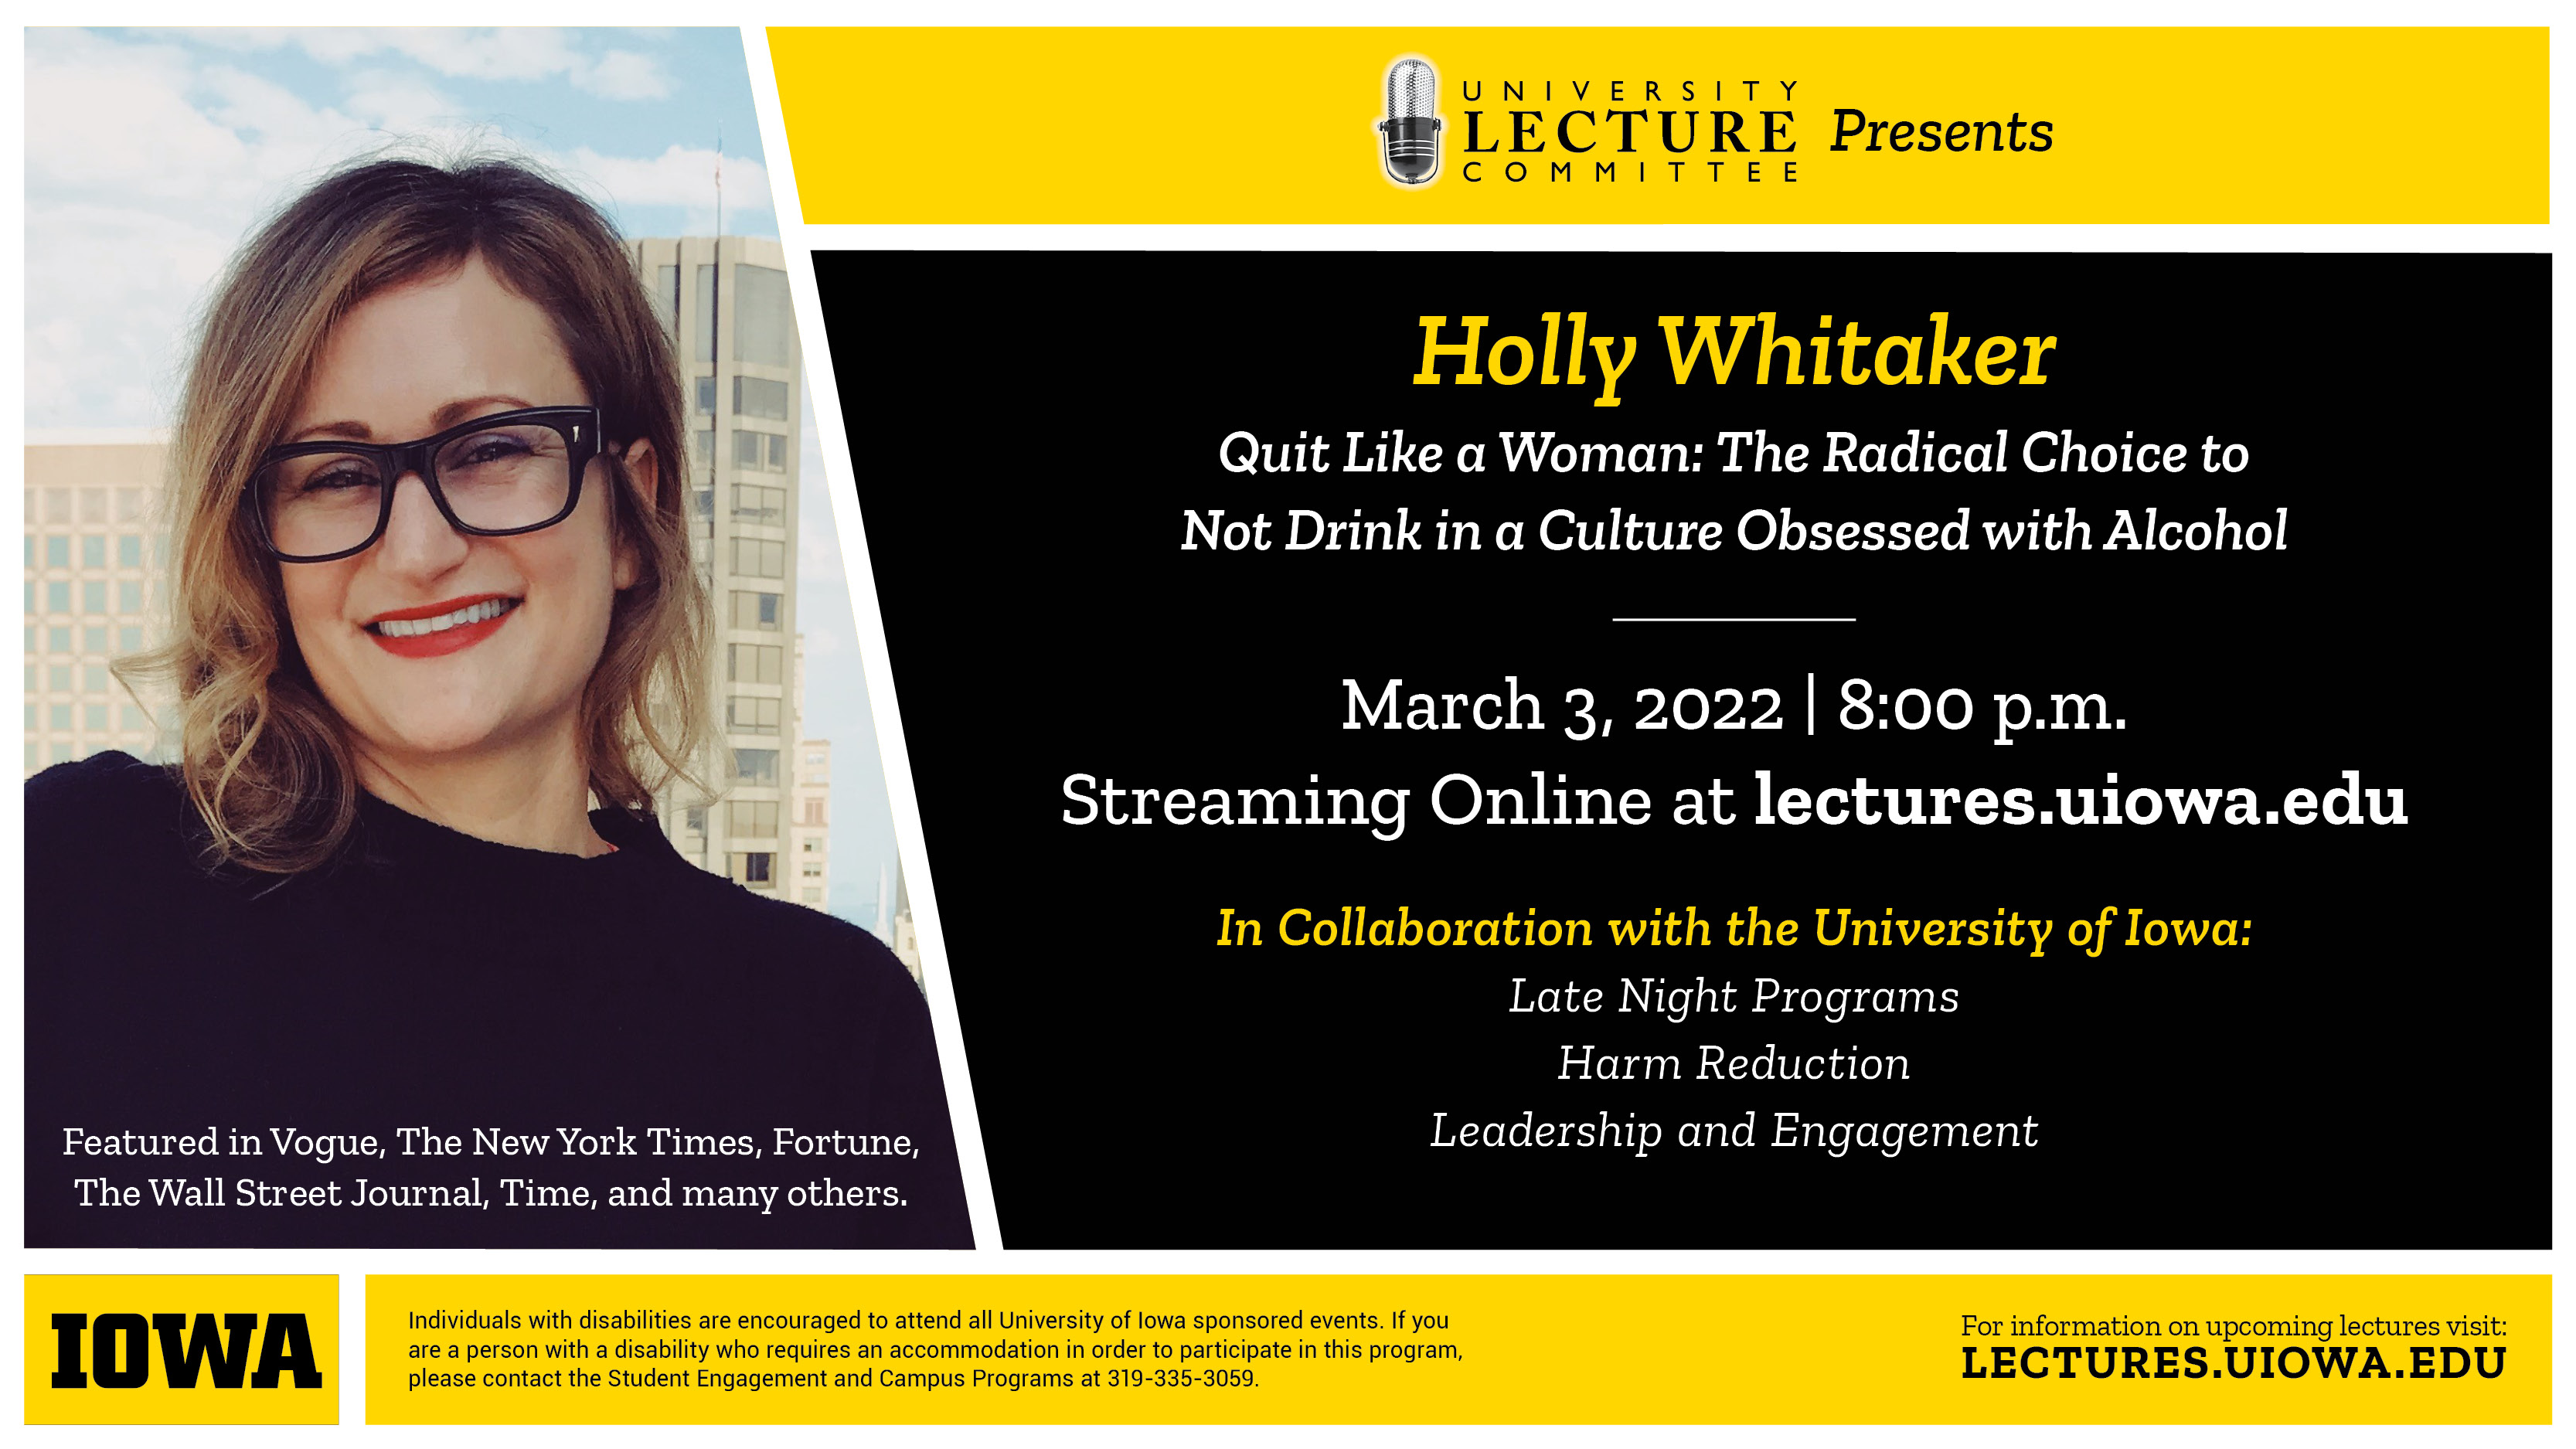 University Lecture Committee presents Holly Whitaker. Quit like a woman: The Radical Choice to Not Drink in a Culture Obsessed with Alcohol. March 3, 2022 at 8:00 pm. Streaming online at lectures.uiowa.edu In Collaboration with the University of Iowa: Late Night Programs, Harm Reduction, Leadership and Engagement